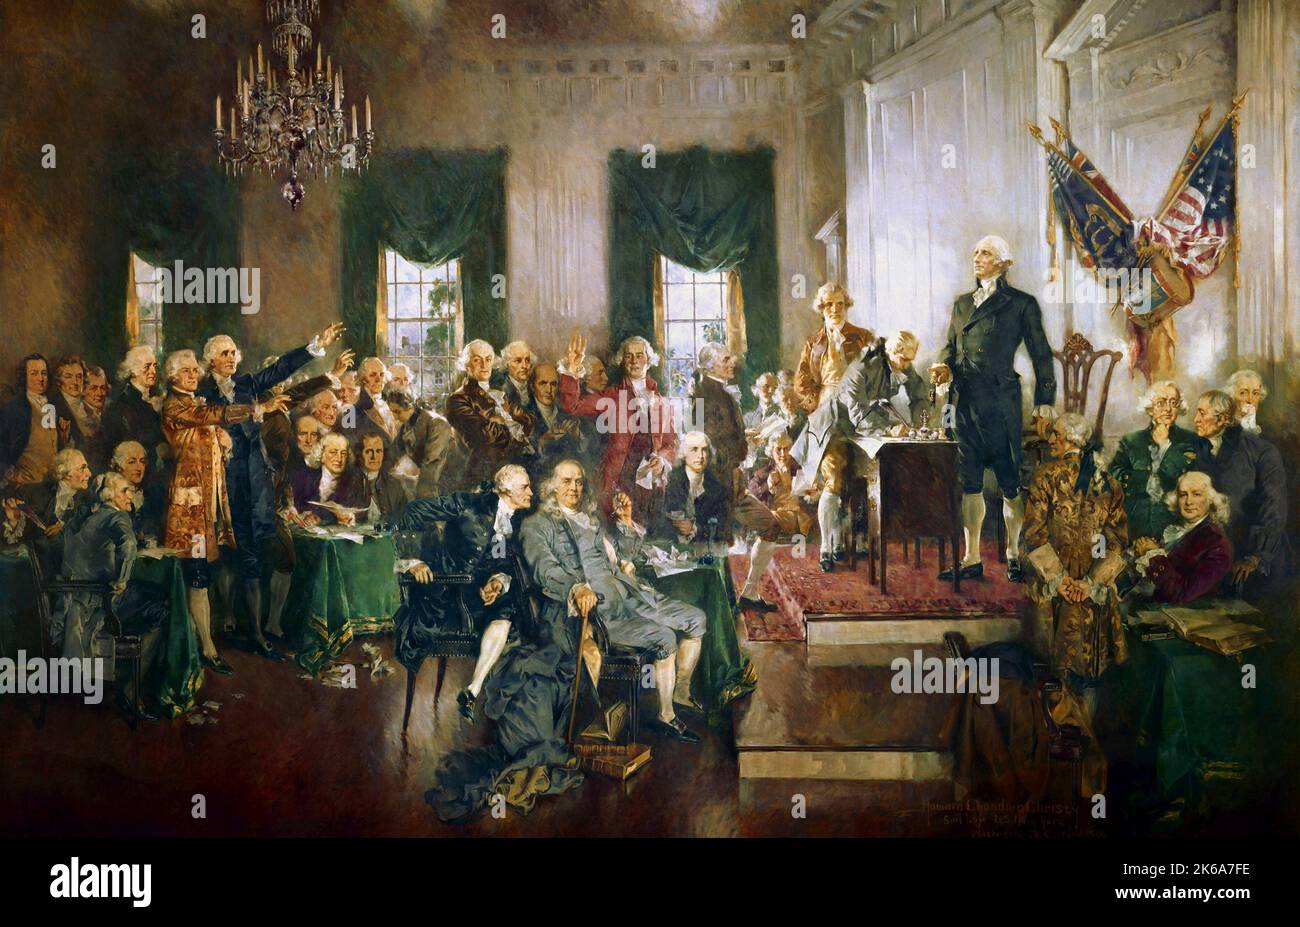 The signing of the U.S. Constitution at the Independence Hall in Philadelphia on September 17, 1787 Stock Photo